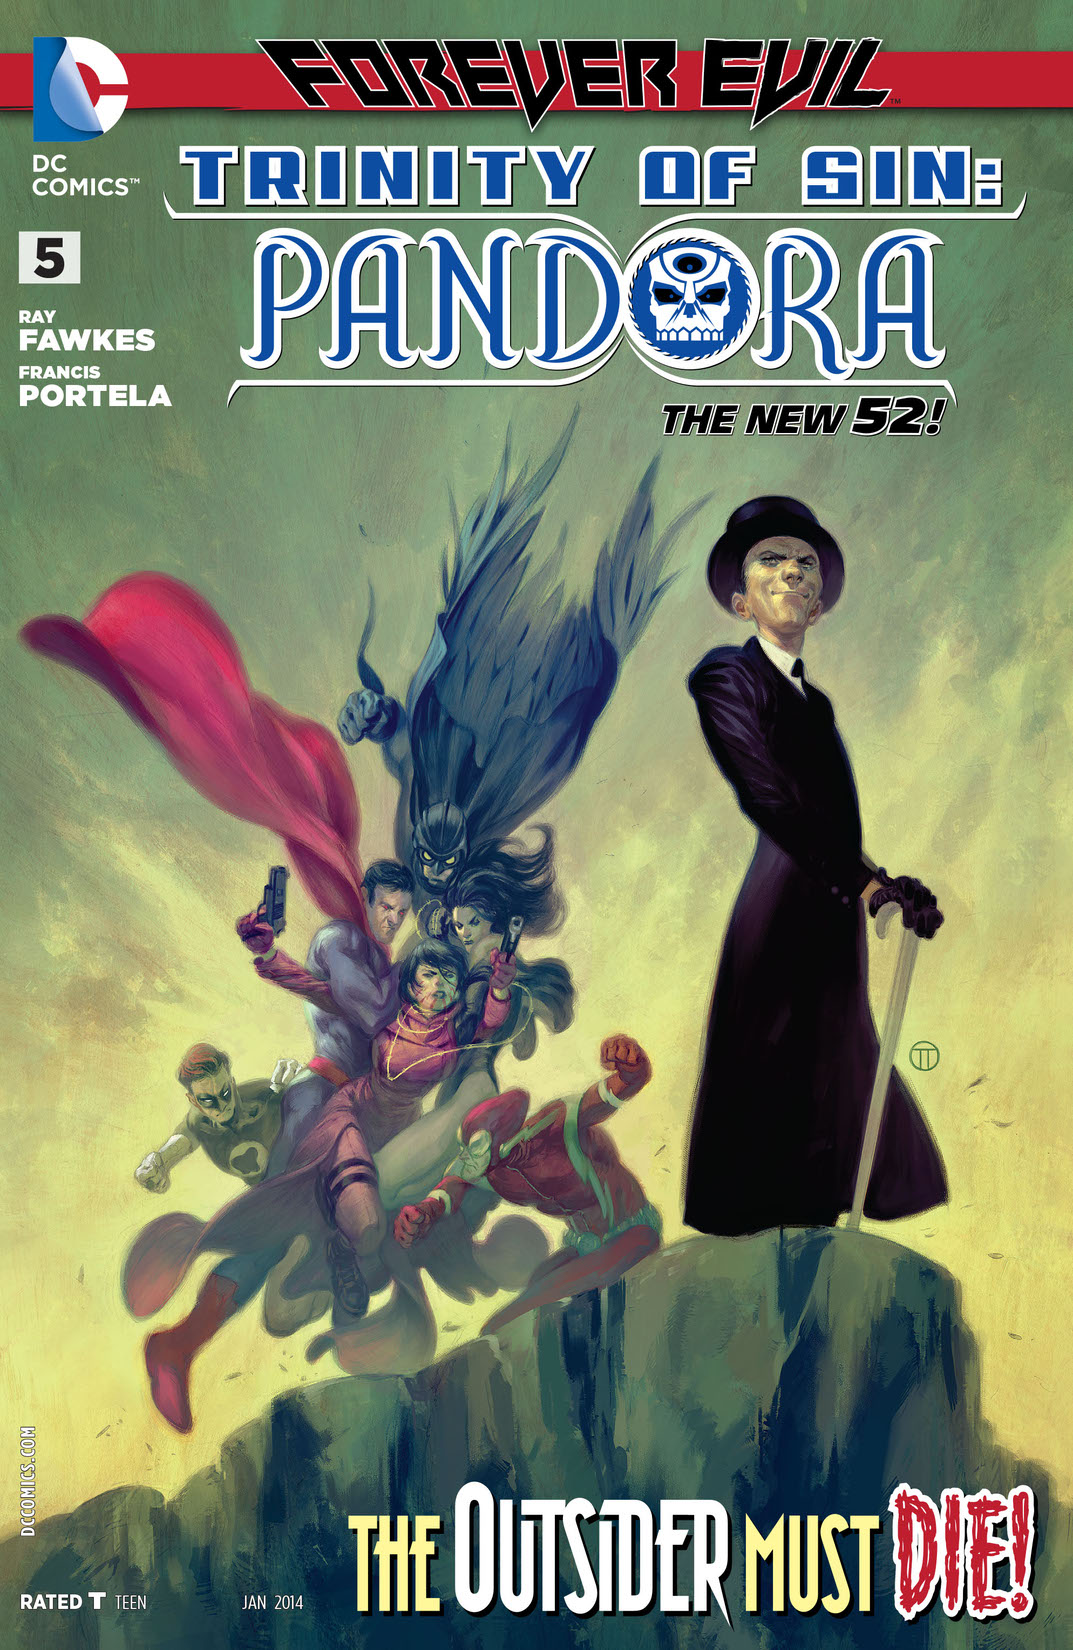 Trinity of Sin: Pandora #5 preview images